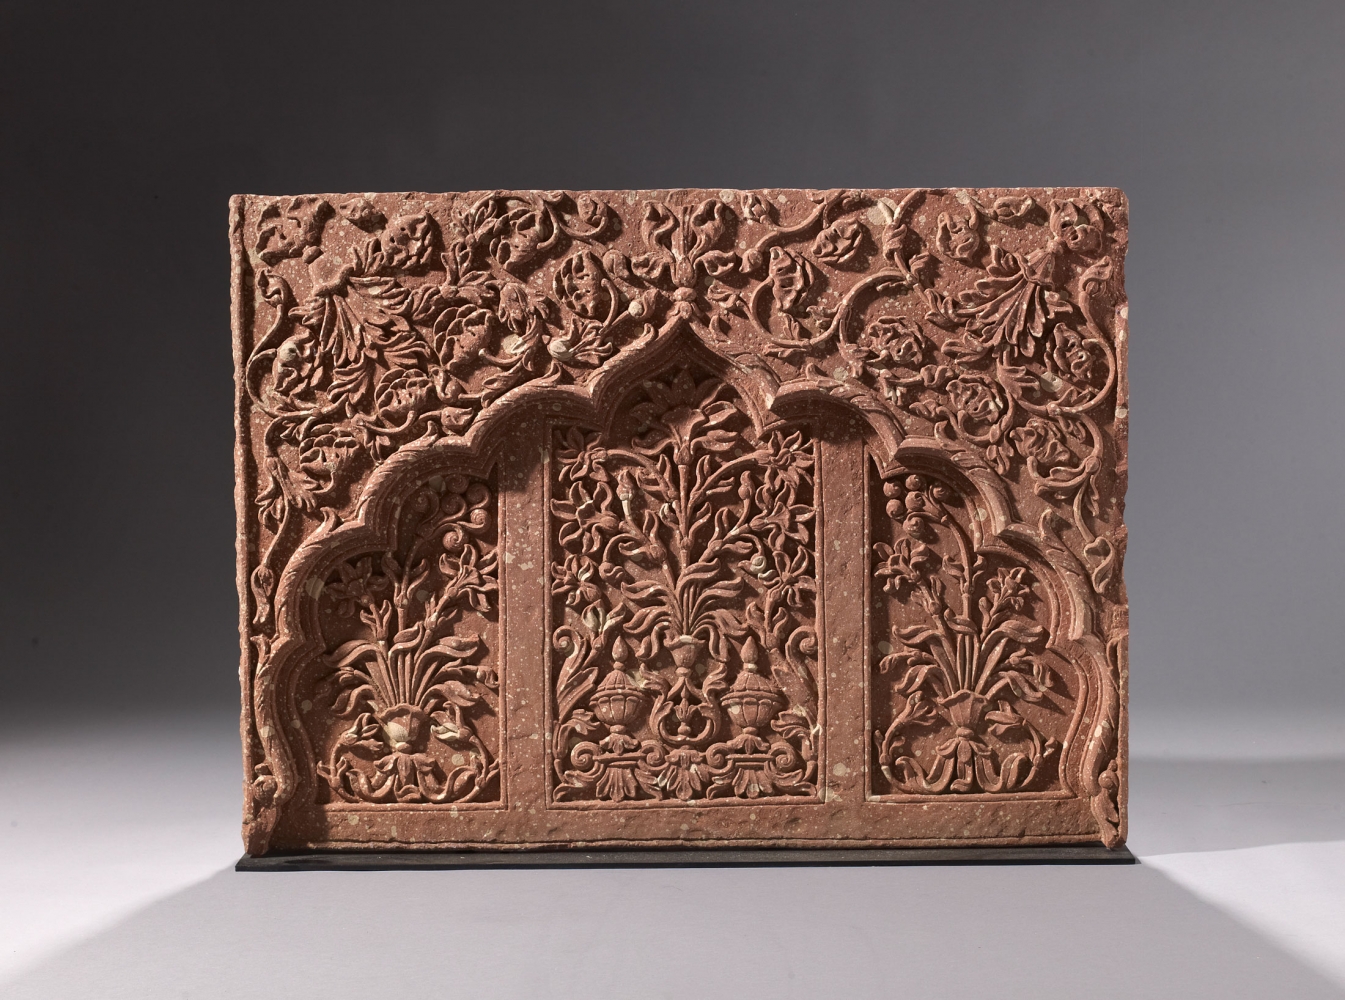 A carved sandstone panel with cusped niche, c. 1680-1730
Sandstone
28 3/8 x 38 1/4 x 4 3/4 inches
(72 x 97 x 12 cm)